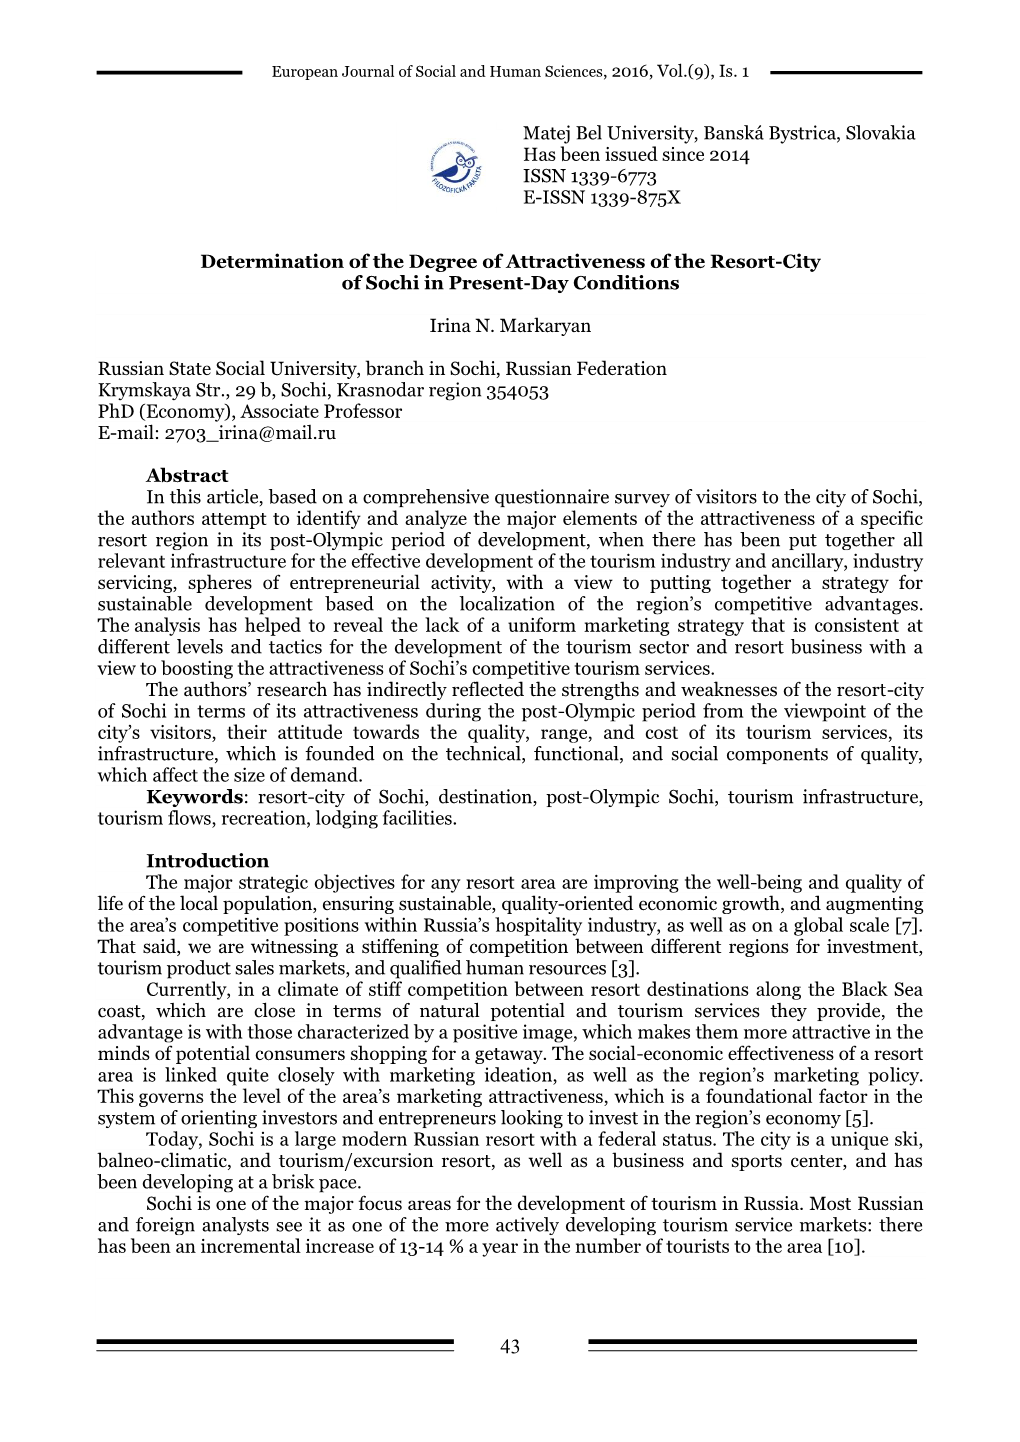 Determination of the Degree of Attractiveness of the Resort-City of Sochi in Present-Day Conditions